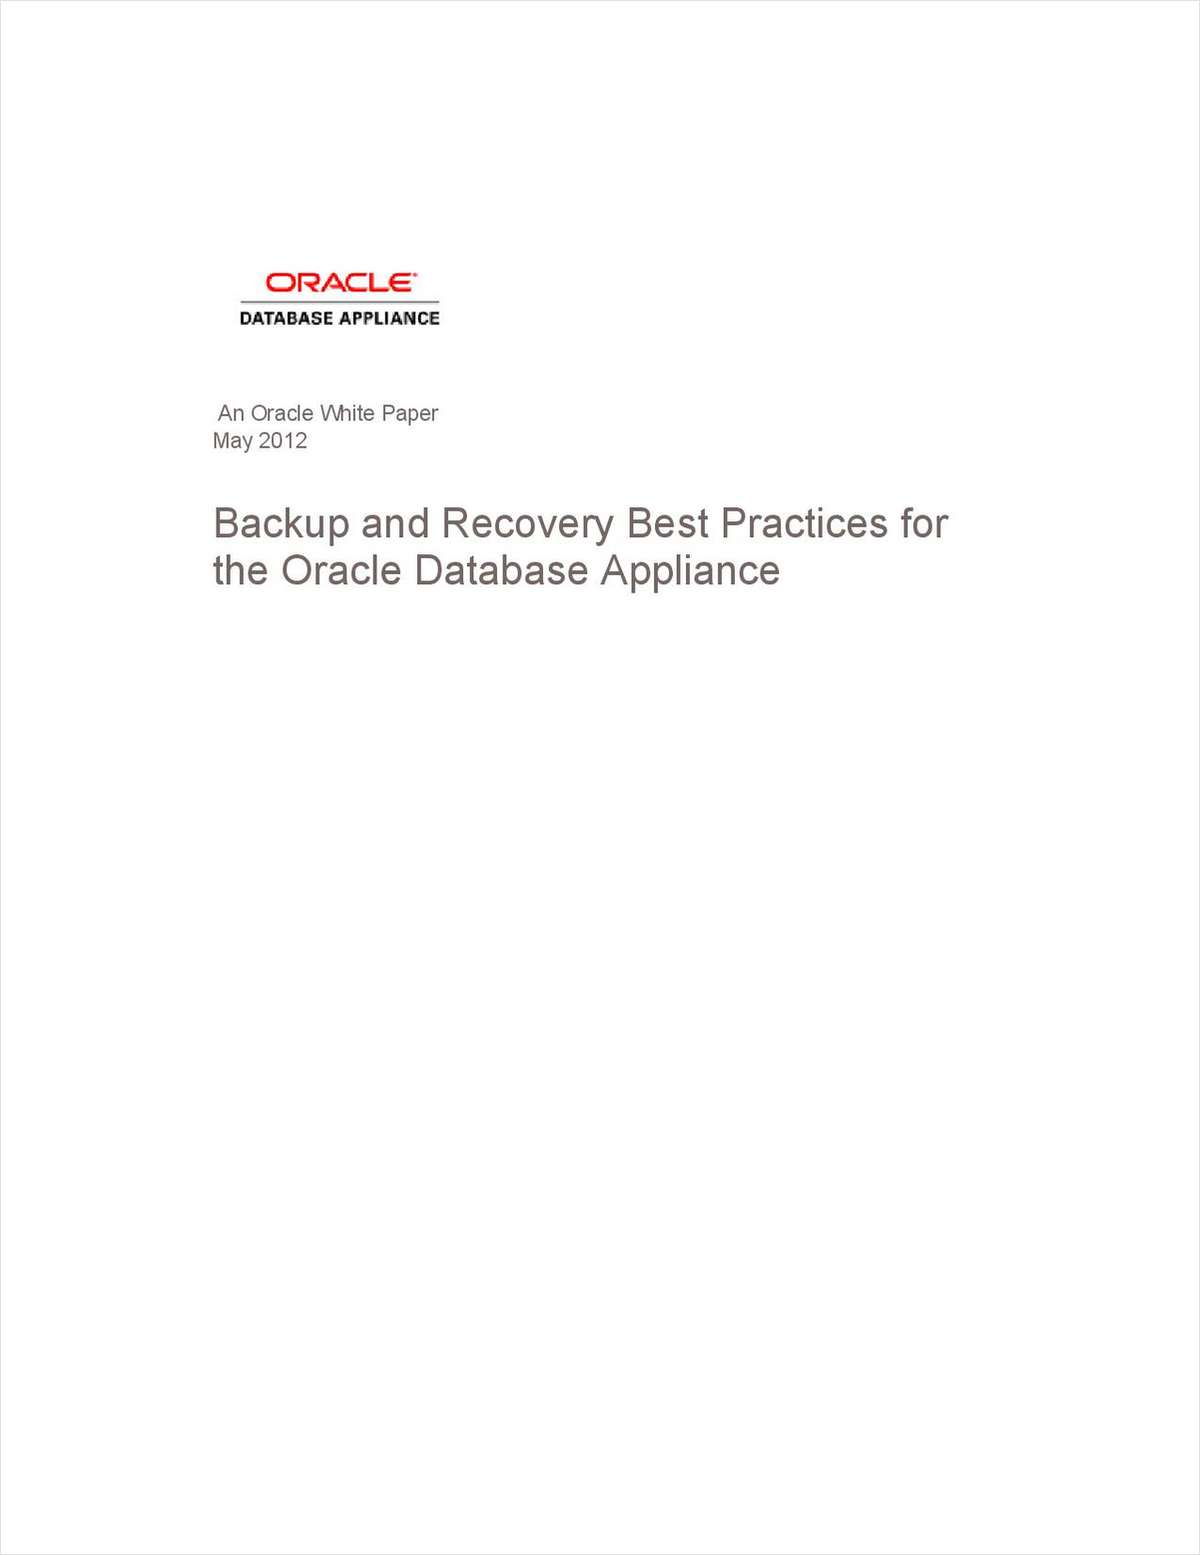 Backup and Recovery Best Practices for the Oracle Database Appliance